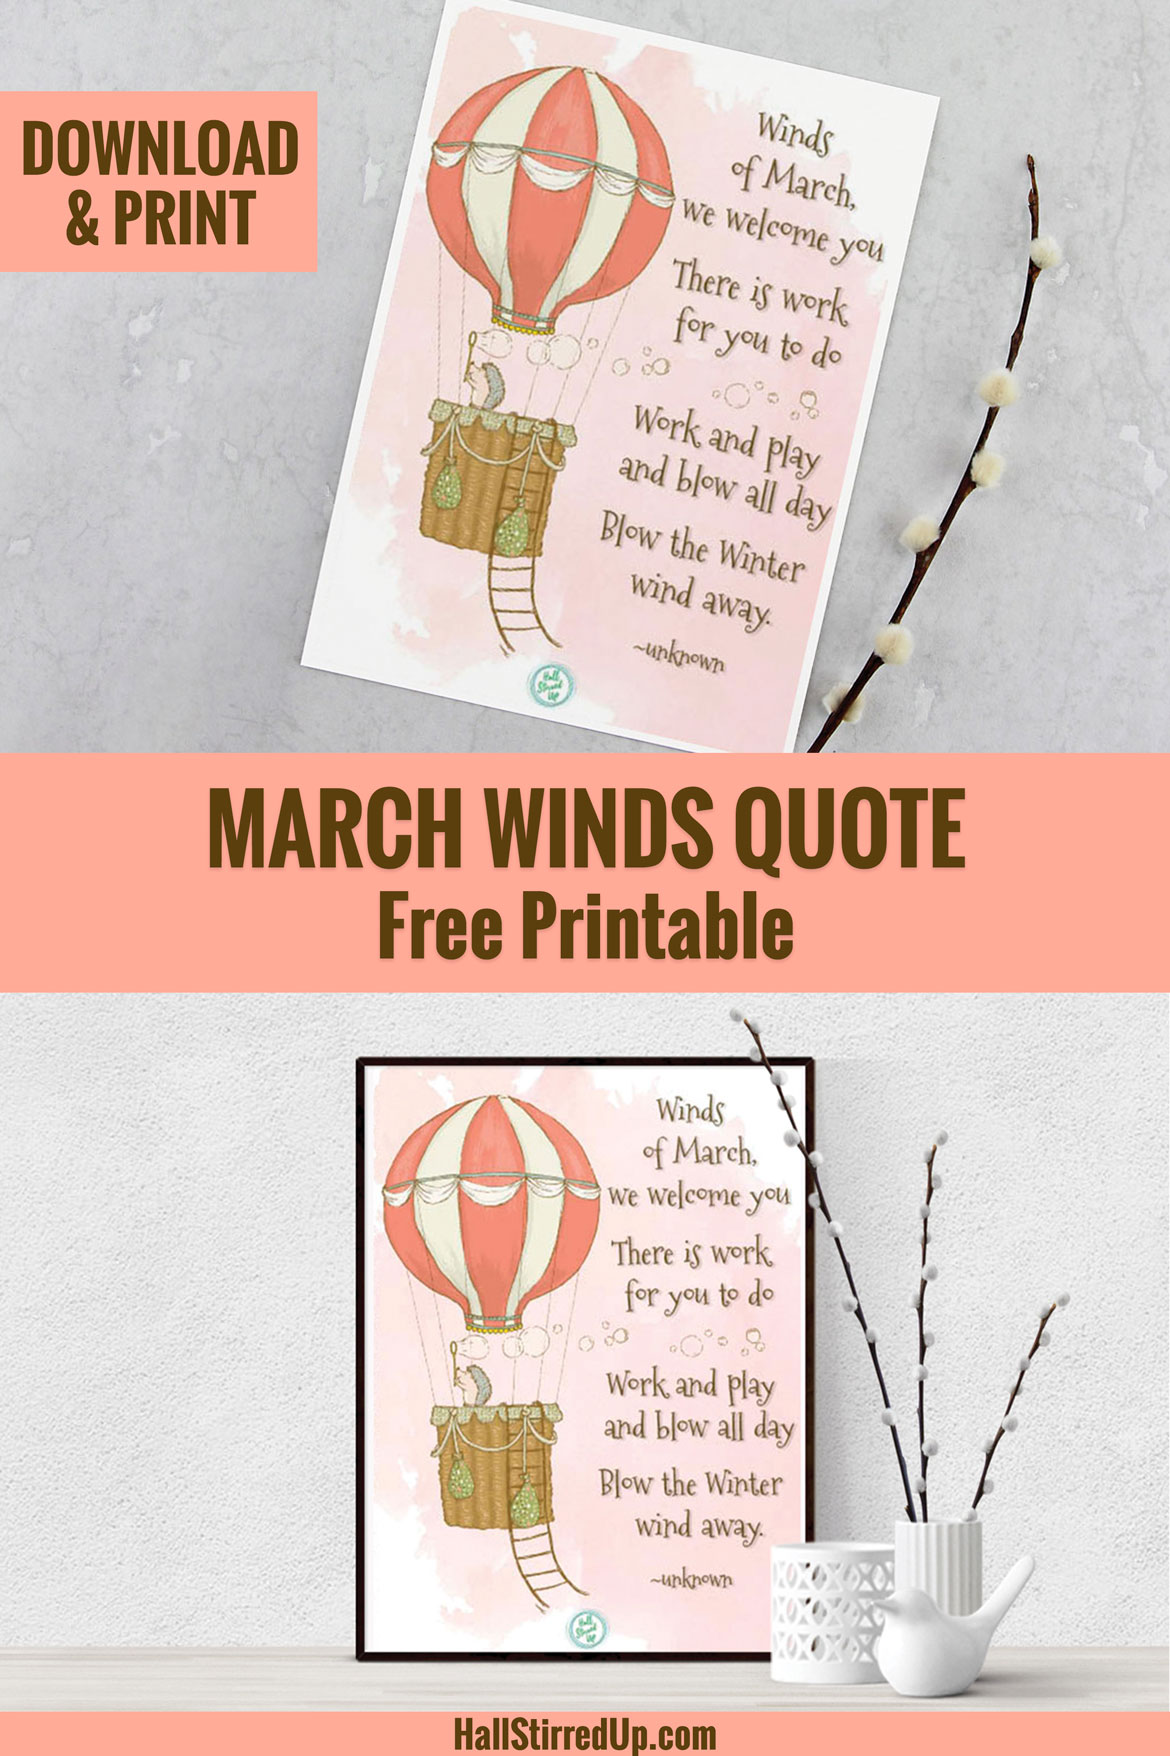 Download your Winds of March printable